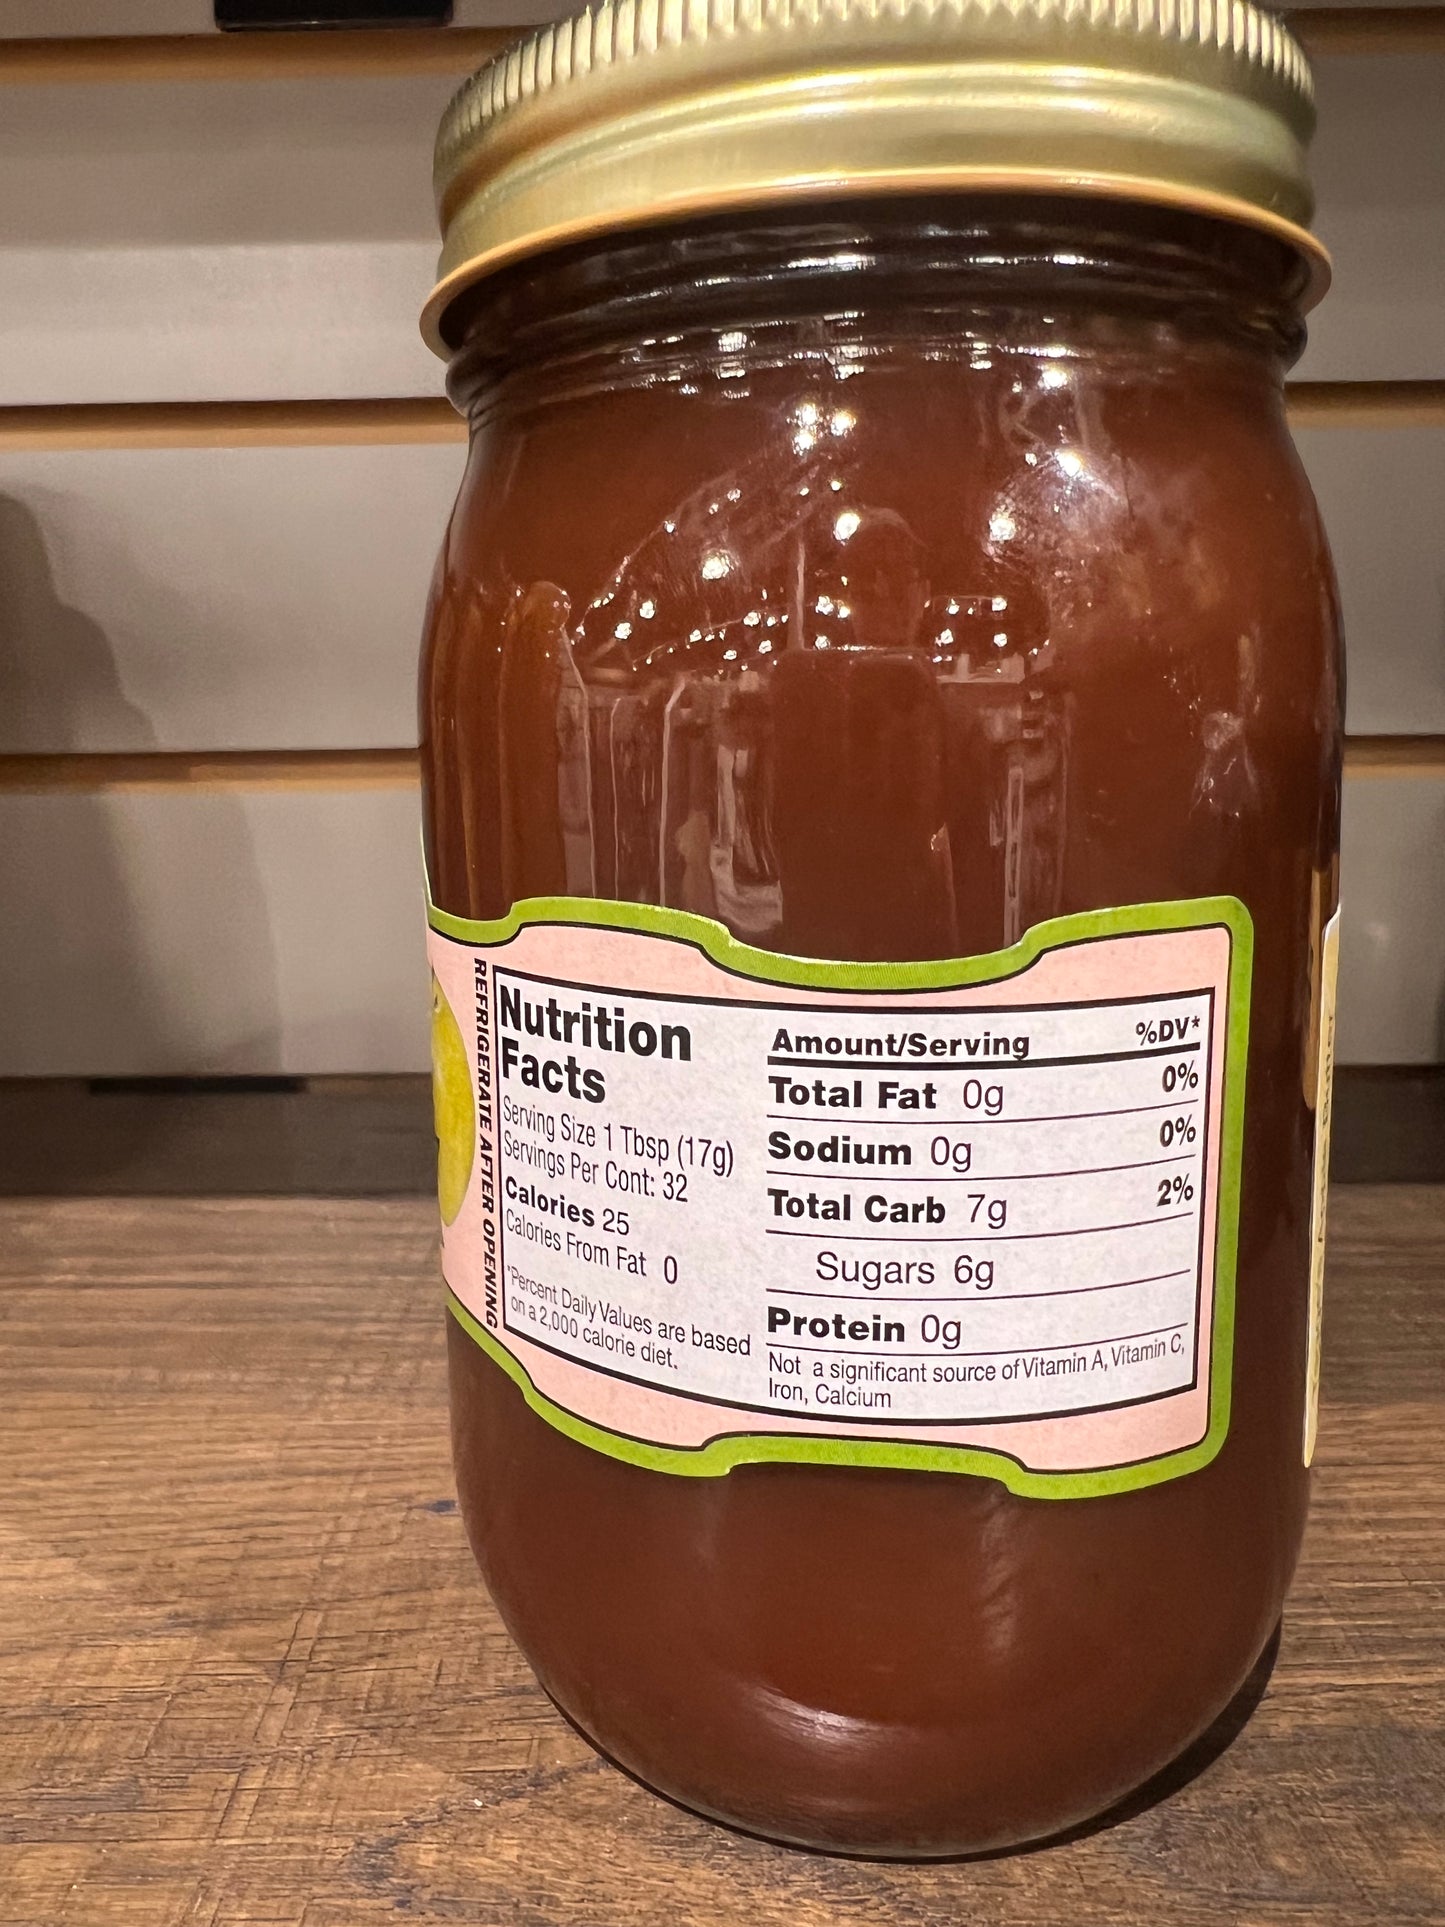 Tagge’s Apple Butter